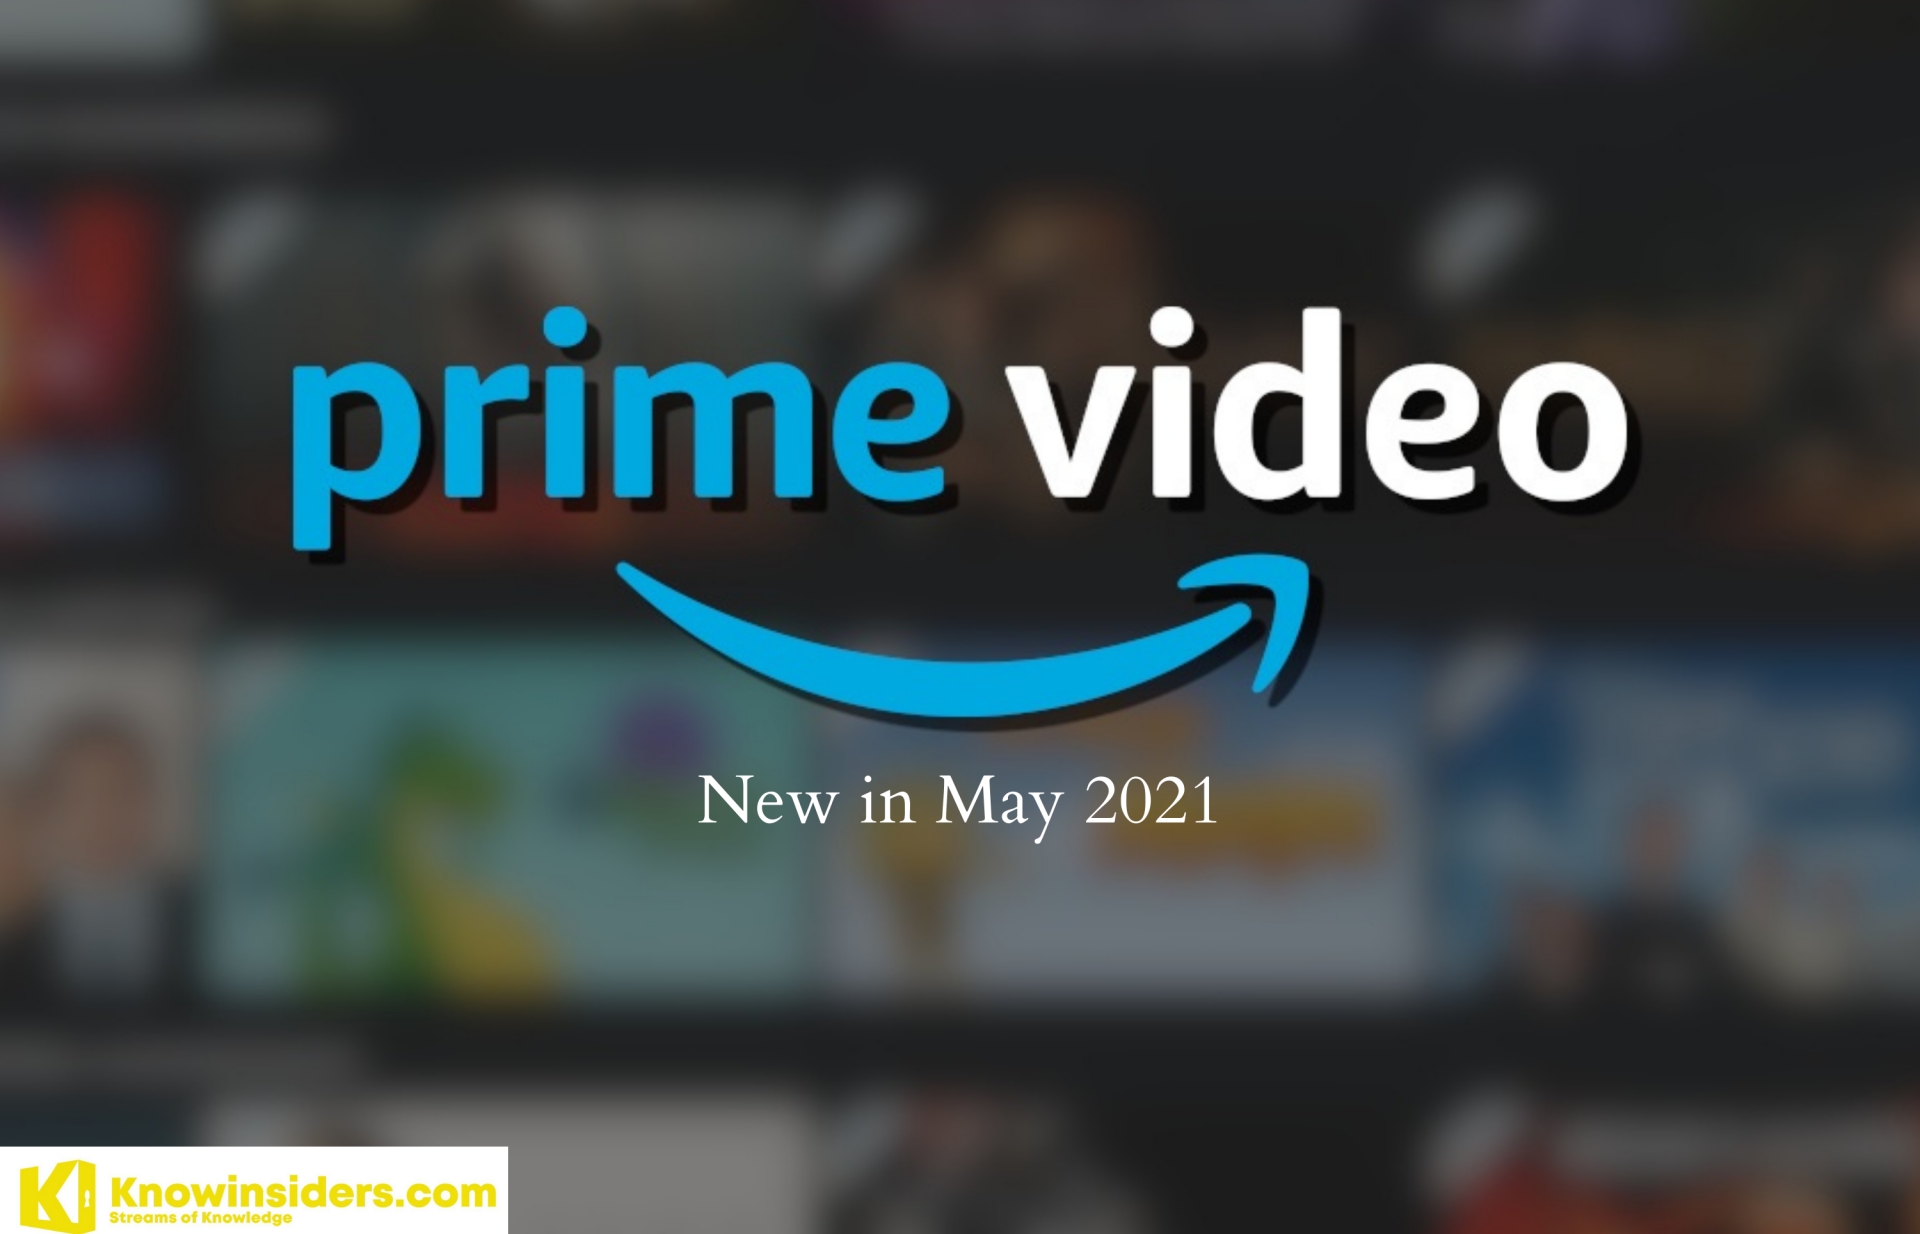 New TV Shows and Movies on Amazon Prime Video in May 2021